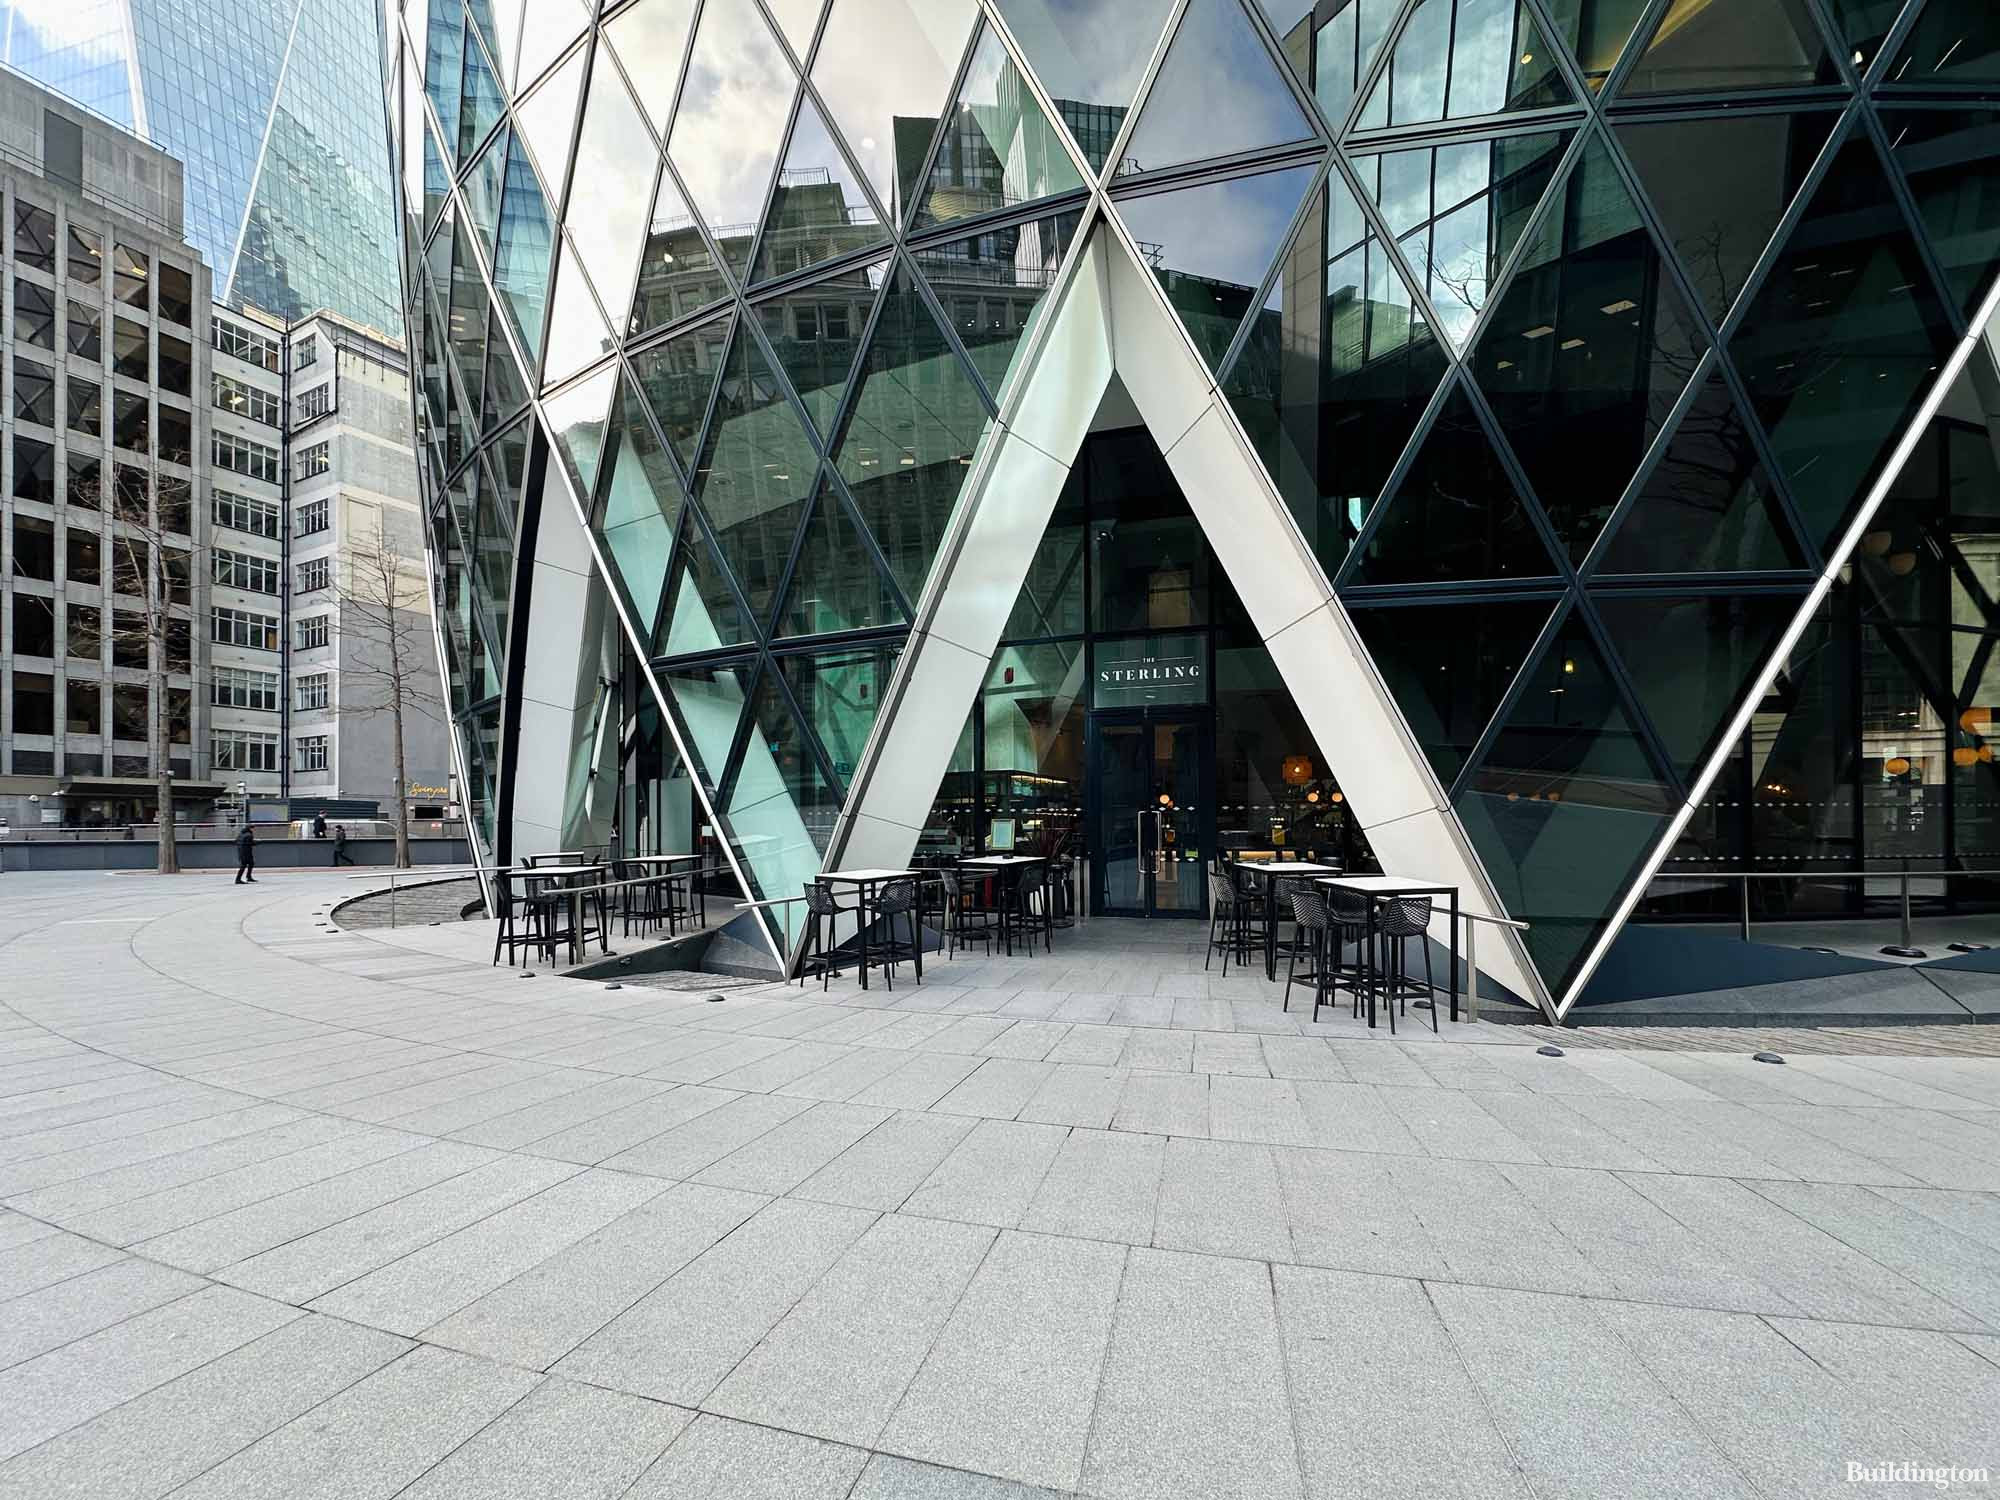 The Sterling at 30 St Mary Axe in the City of London EC3